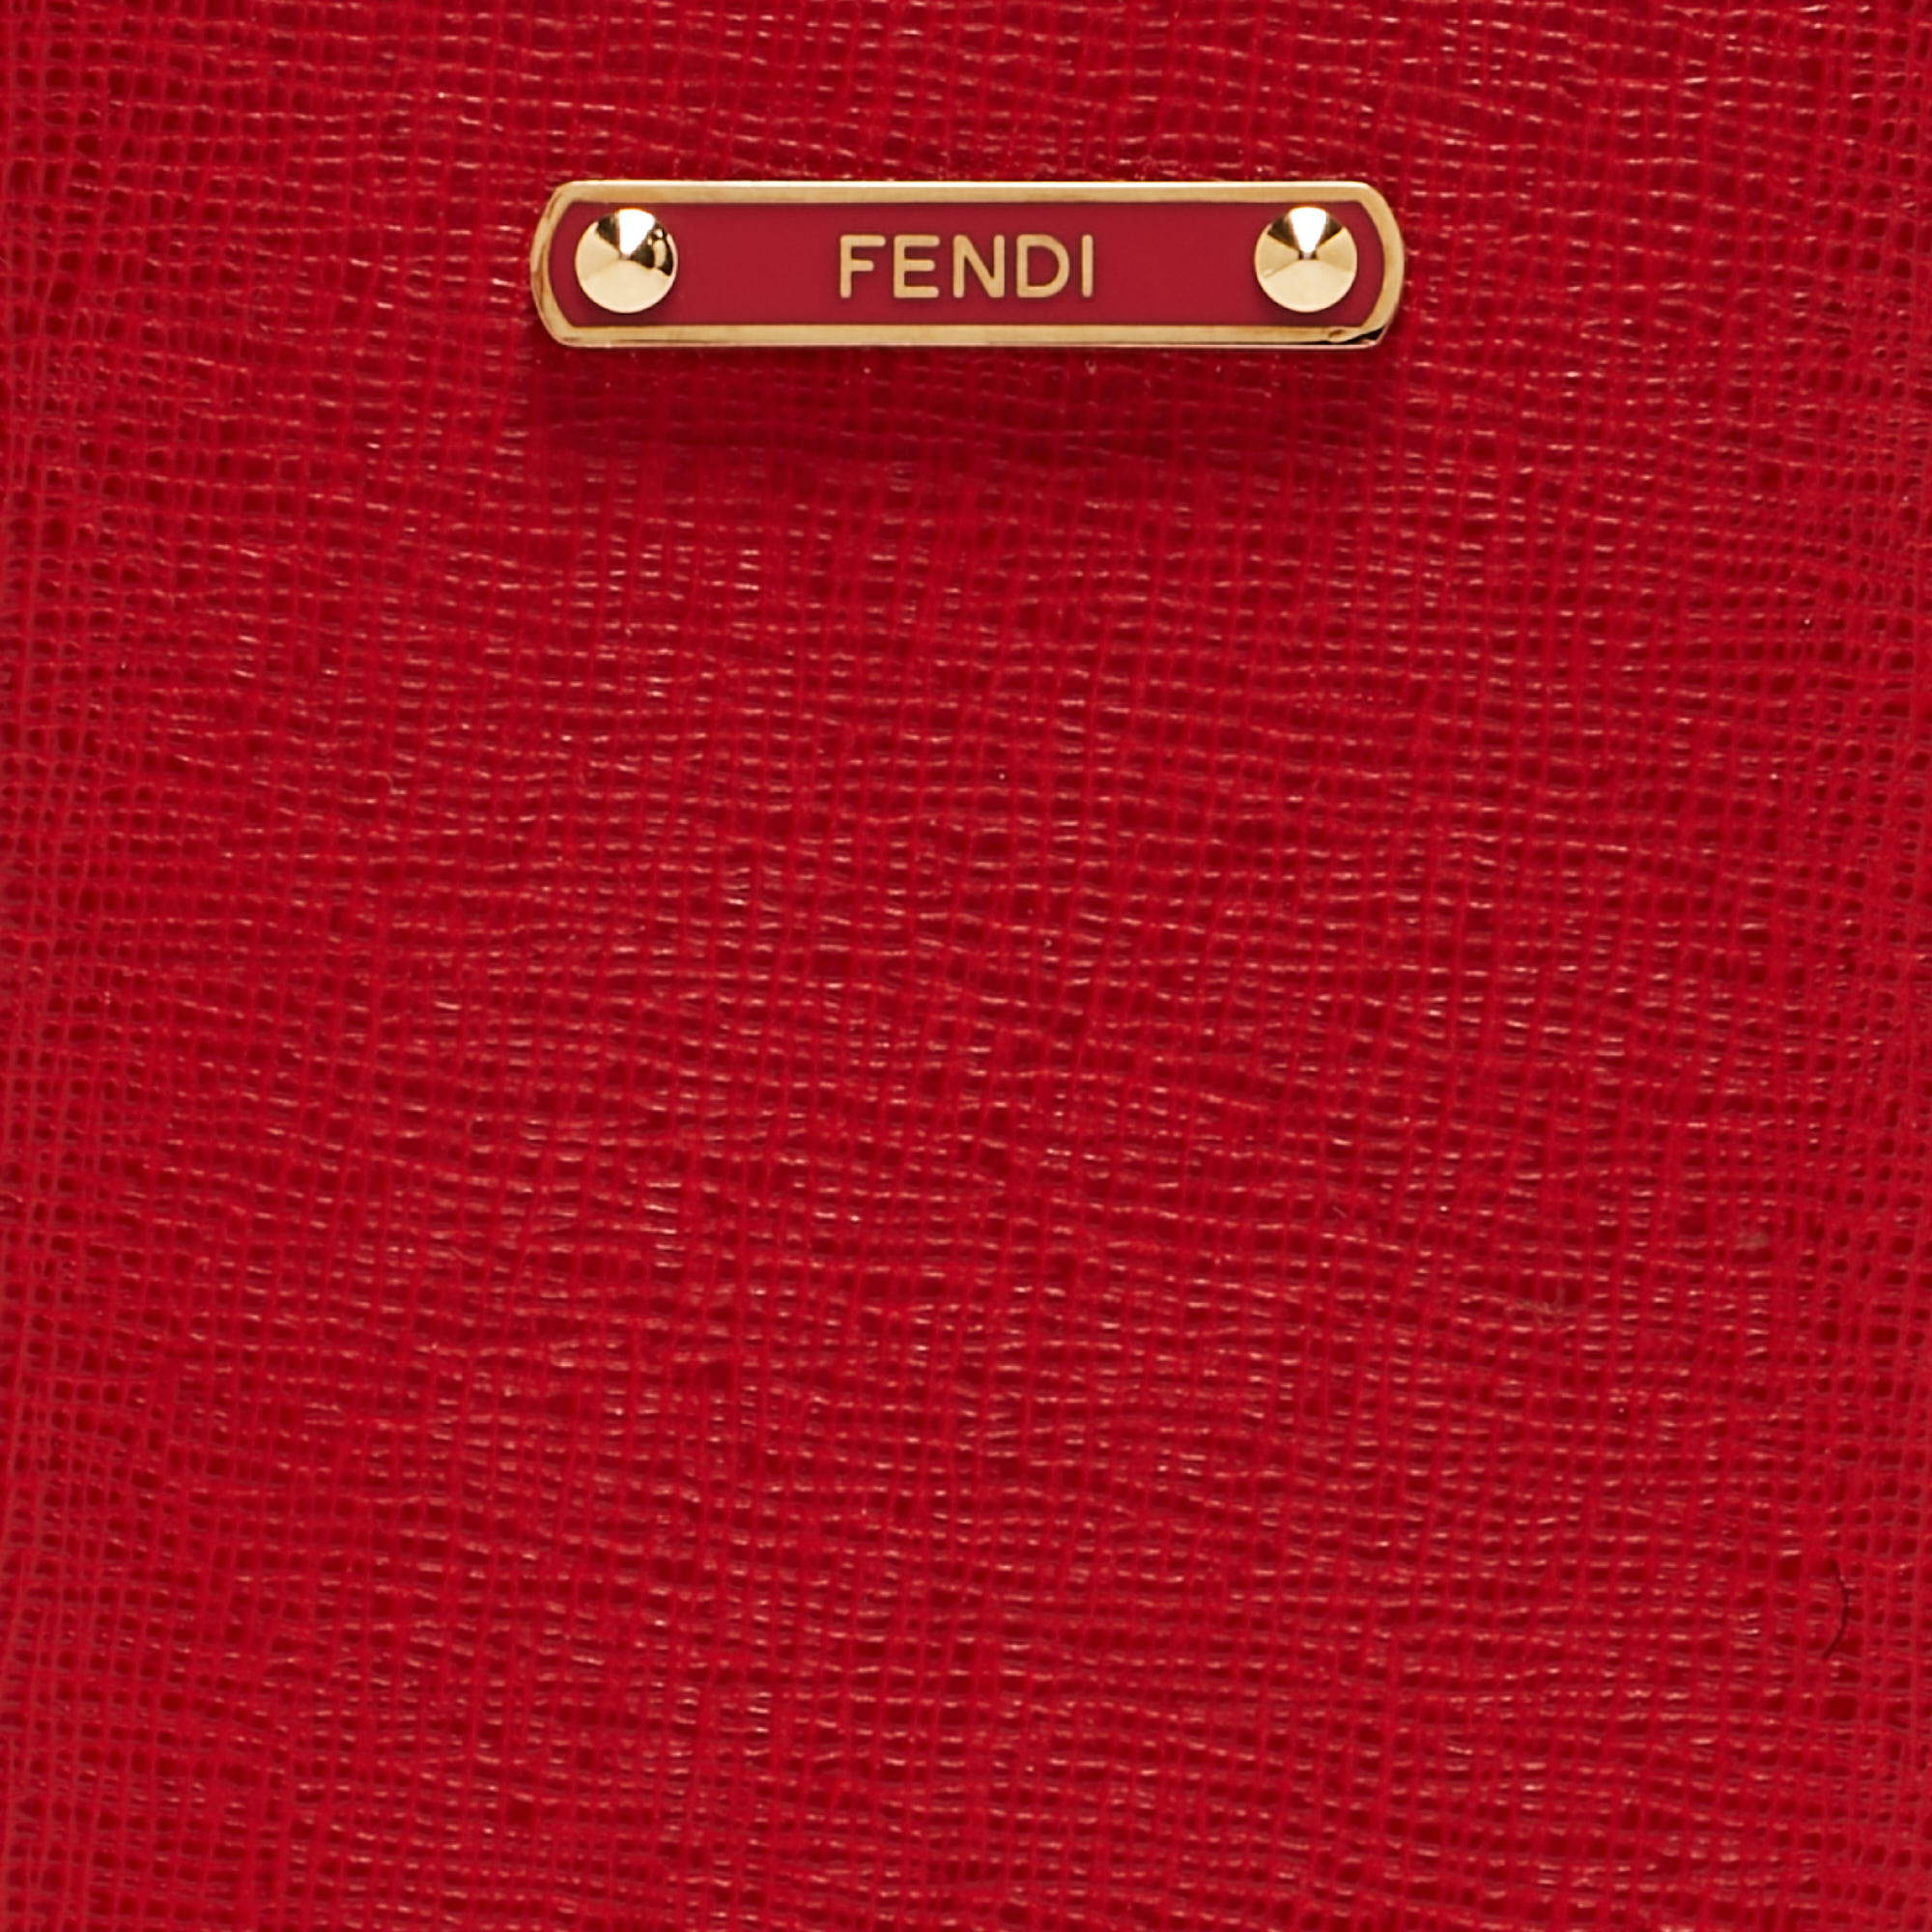 Fendi Red Leather Logo Phone Cover